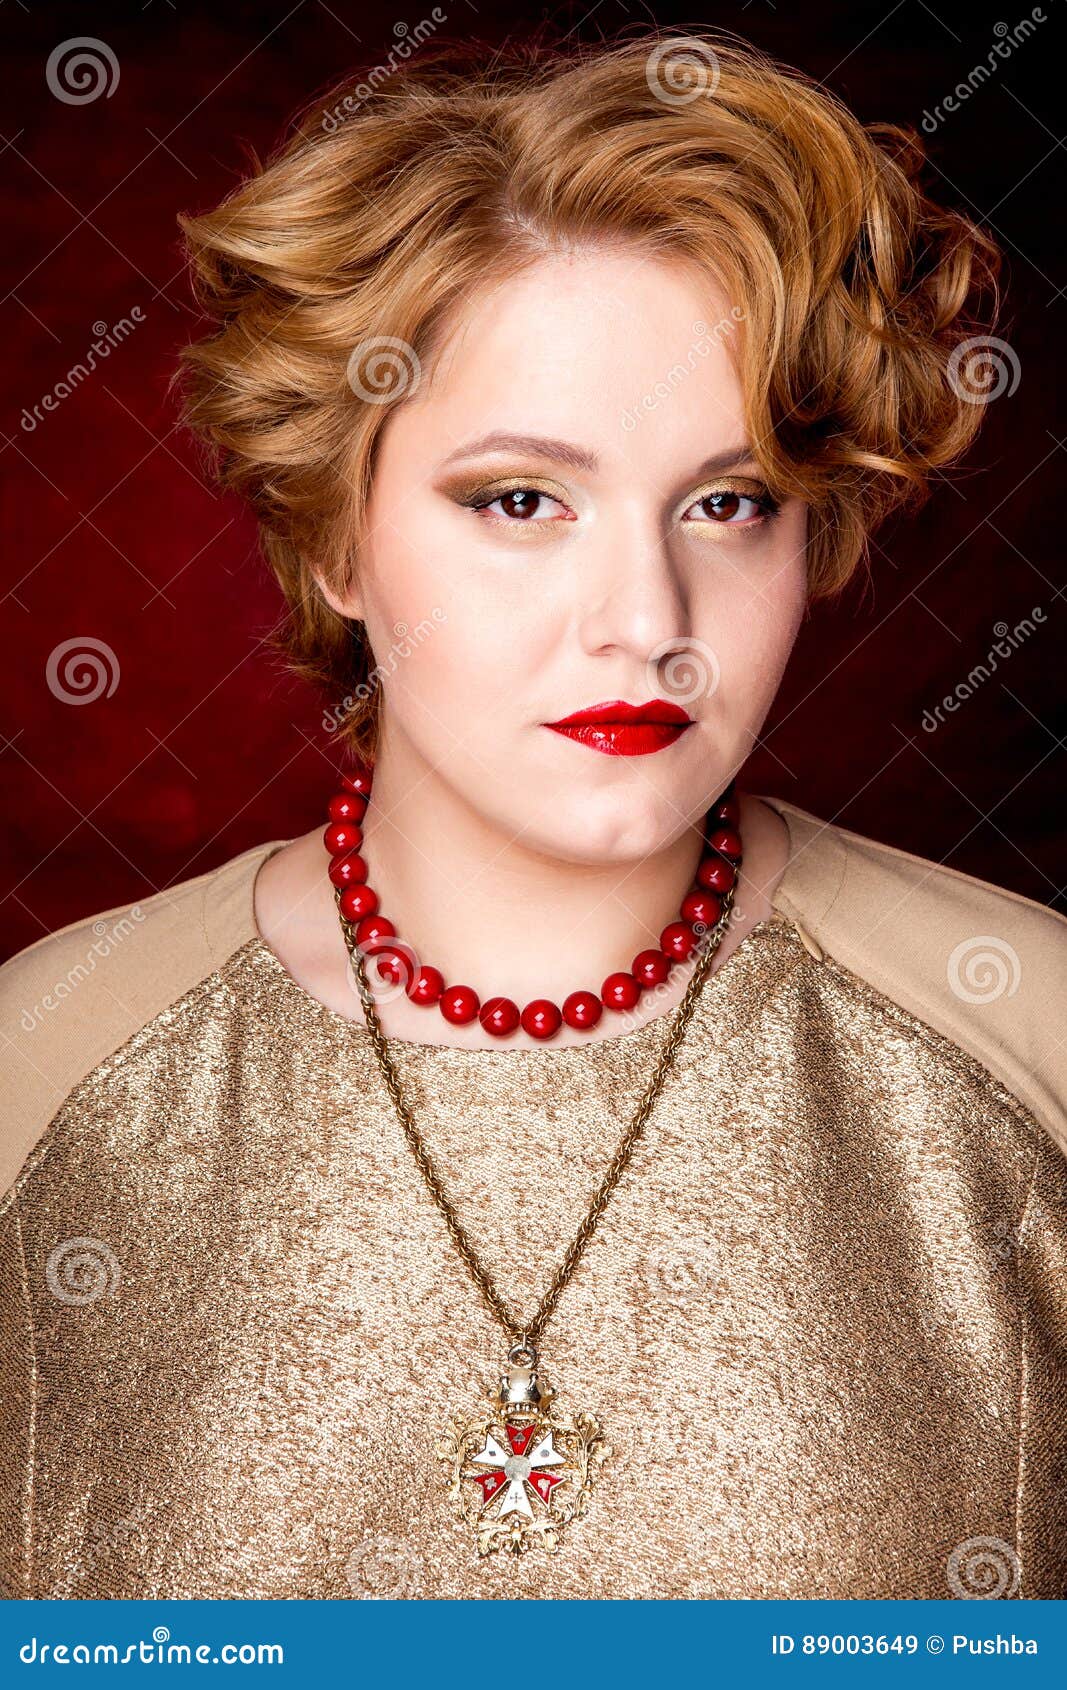 Beautiful Fat Girl With Honey Colored Hair On A Black Background